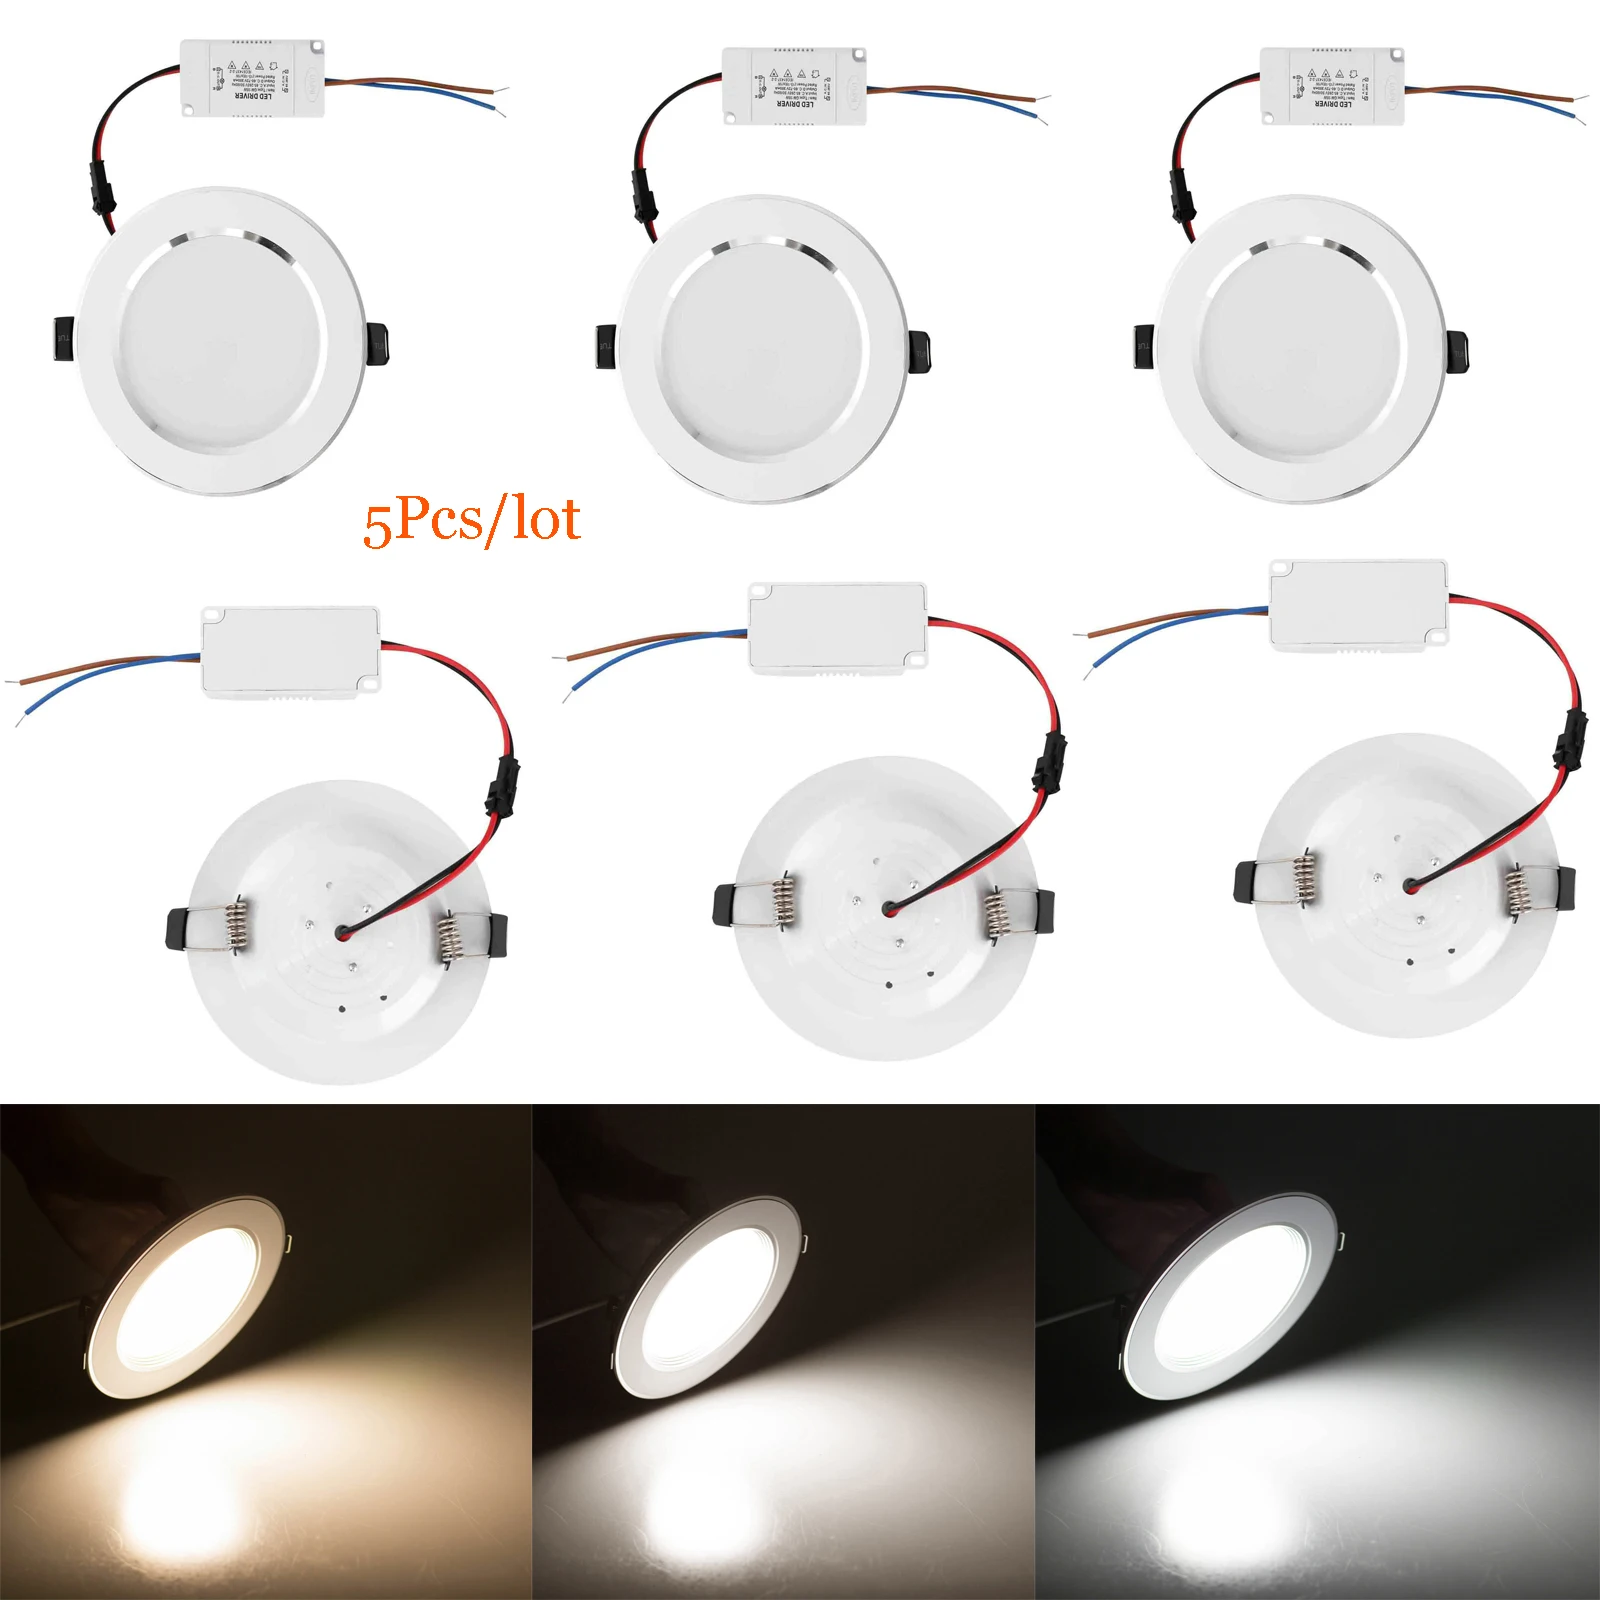 

5Pcs Dimmable LED Panel Downlight Recessed Ceiling Light Round 3W 5W 7W 9W 12W 15W 18W Lamp 220V 110V (Cool/Neutral/Warm White)